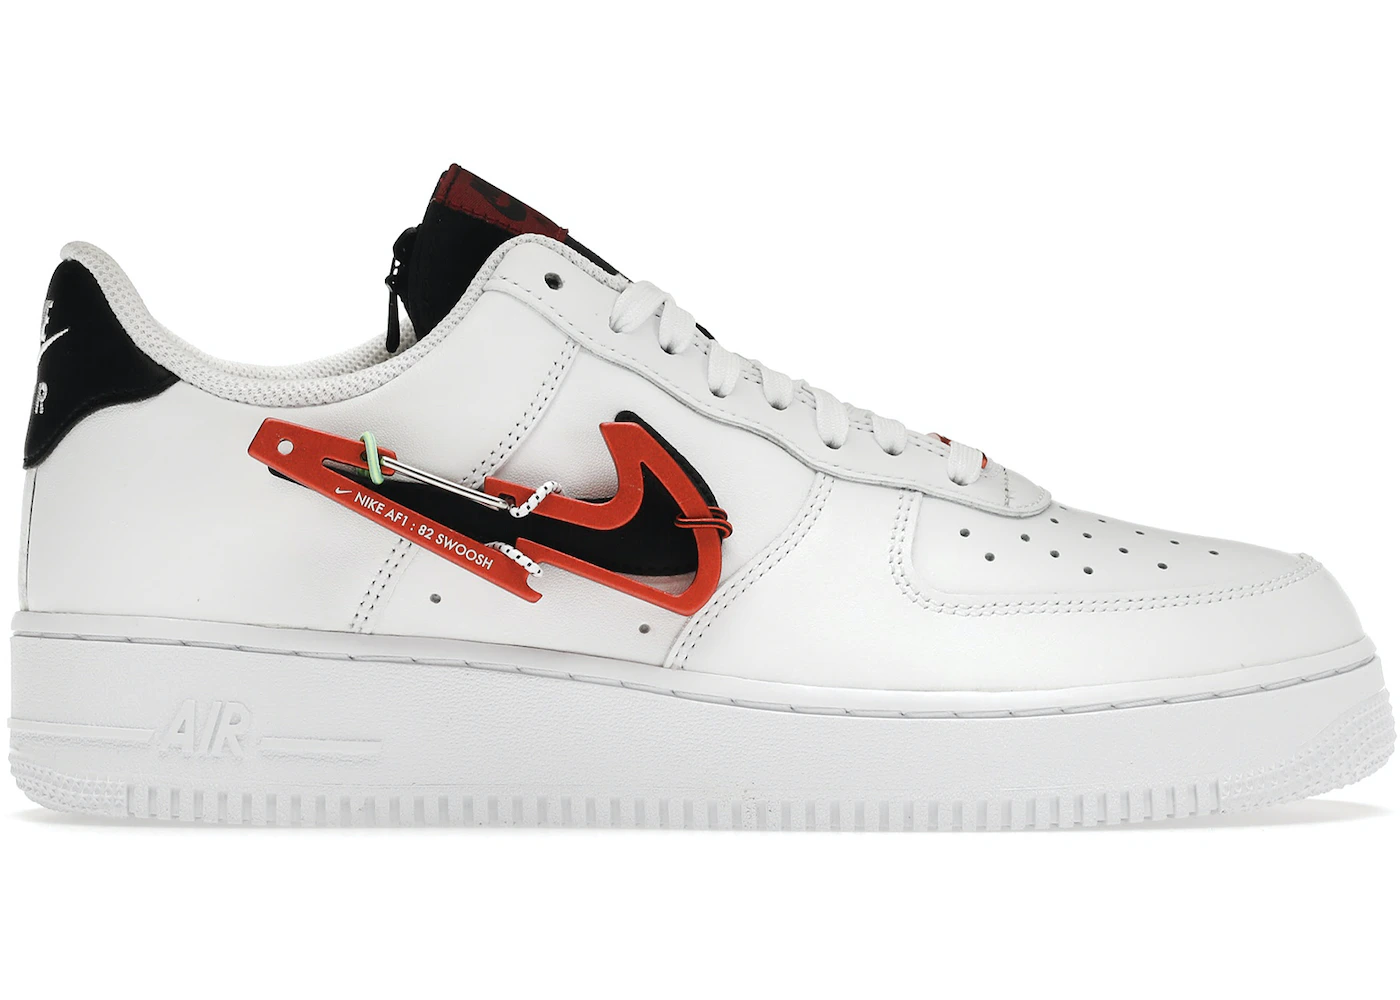 Competidores Contratar Disfrazado Nike Air Force 1 Low Carabiner Swoosh Red Men's - DH7579-100 - US